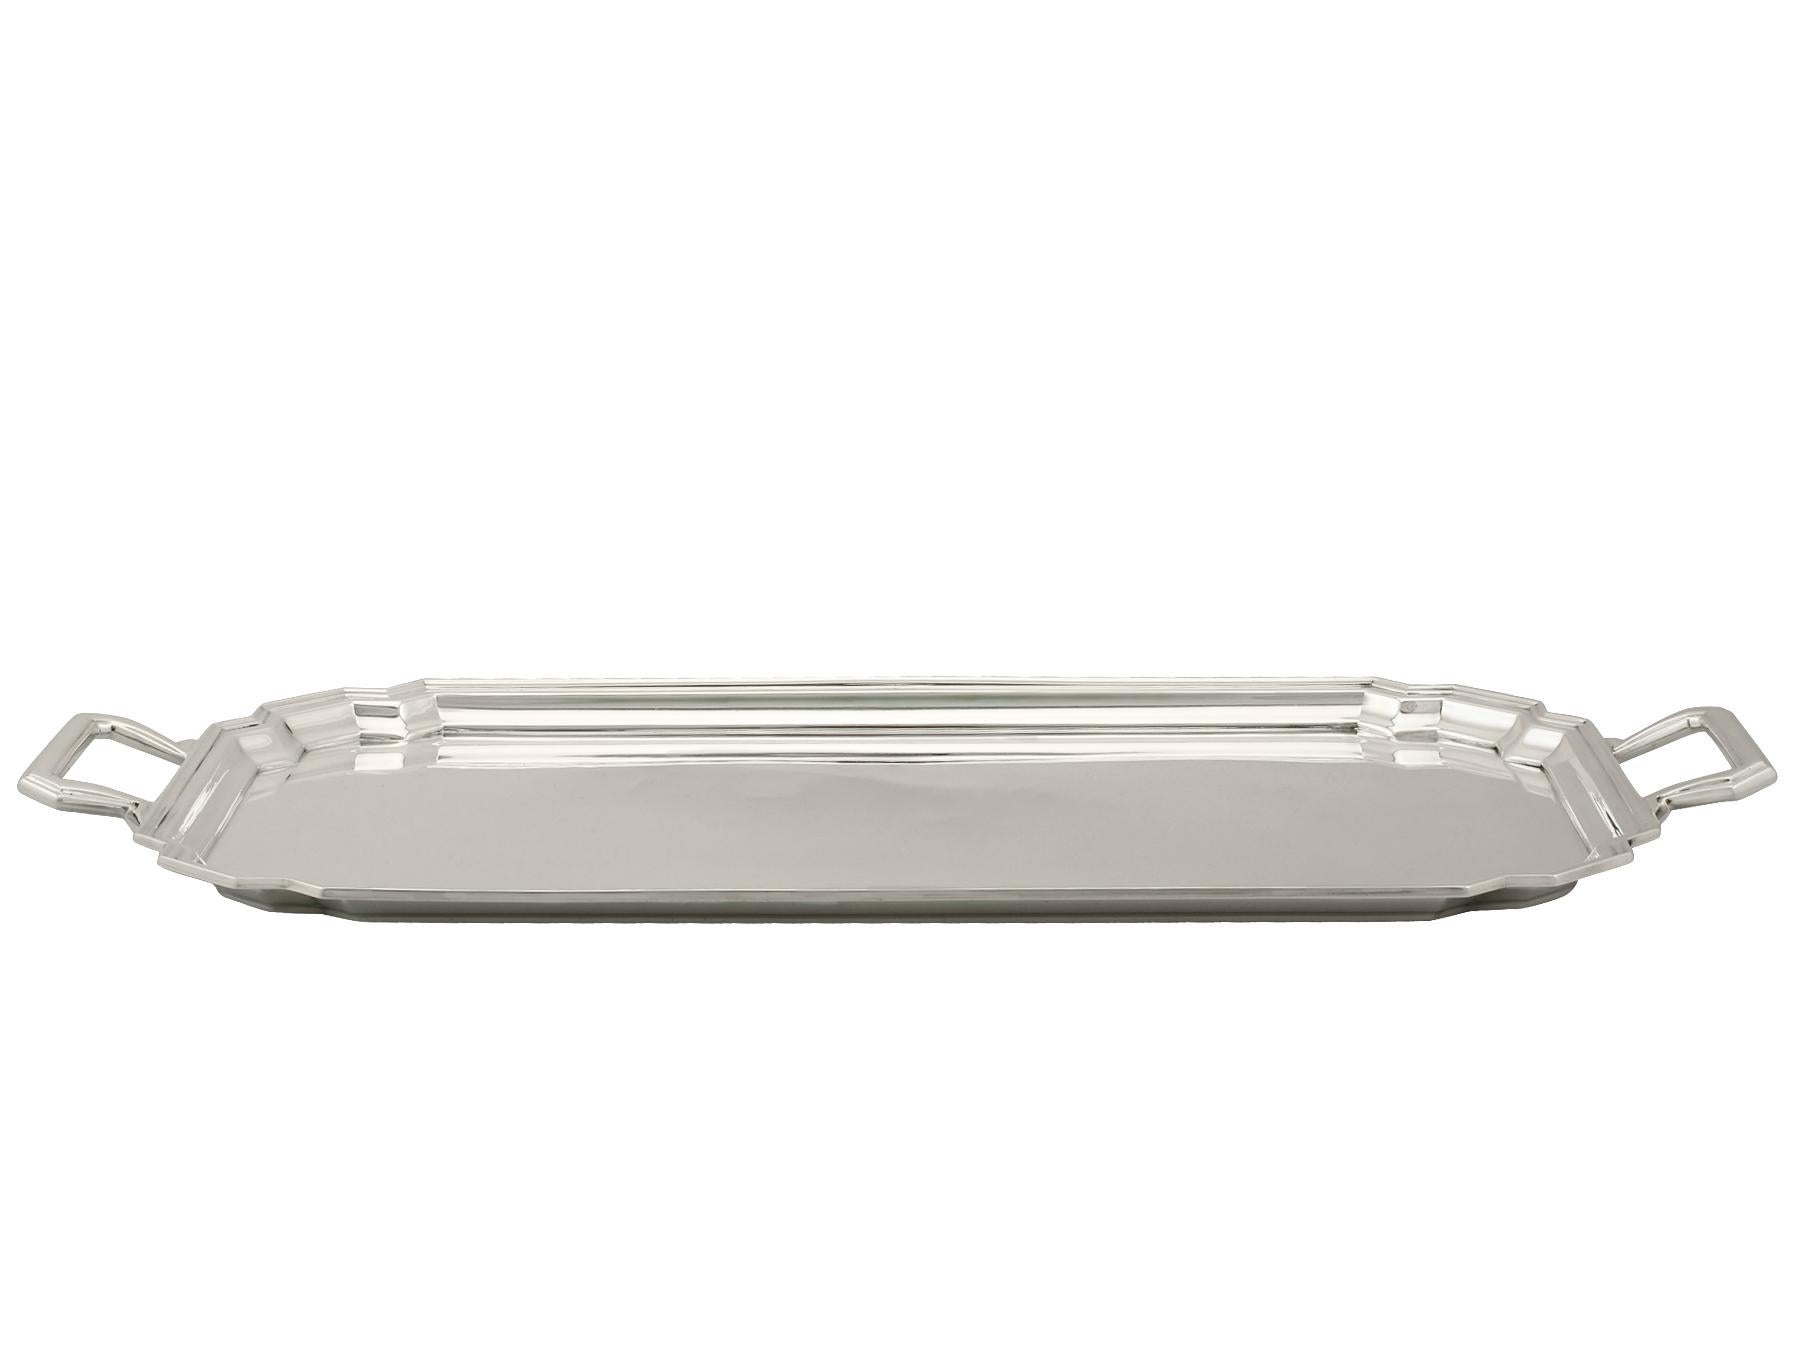 An exceptional, fine and impressive antique George V English sterling silver tray in the Art Deco style; an addition to our range of silver trays, salvers and plates.

This exceptional antique George V sterling silver tray has a plain rectangular